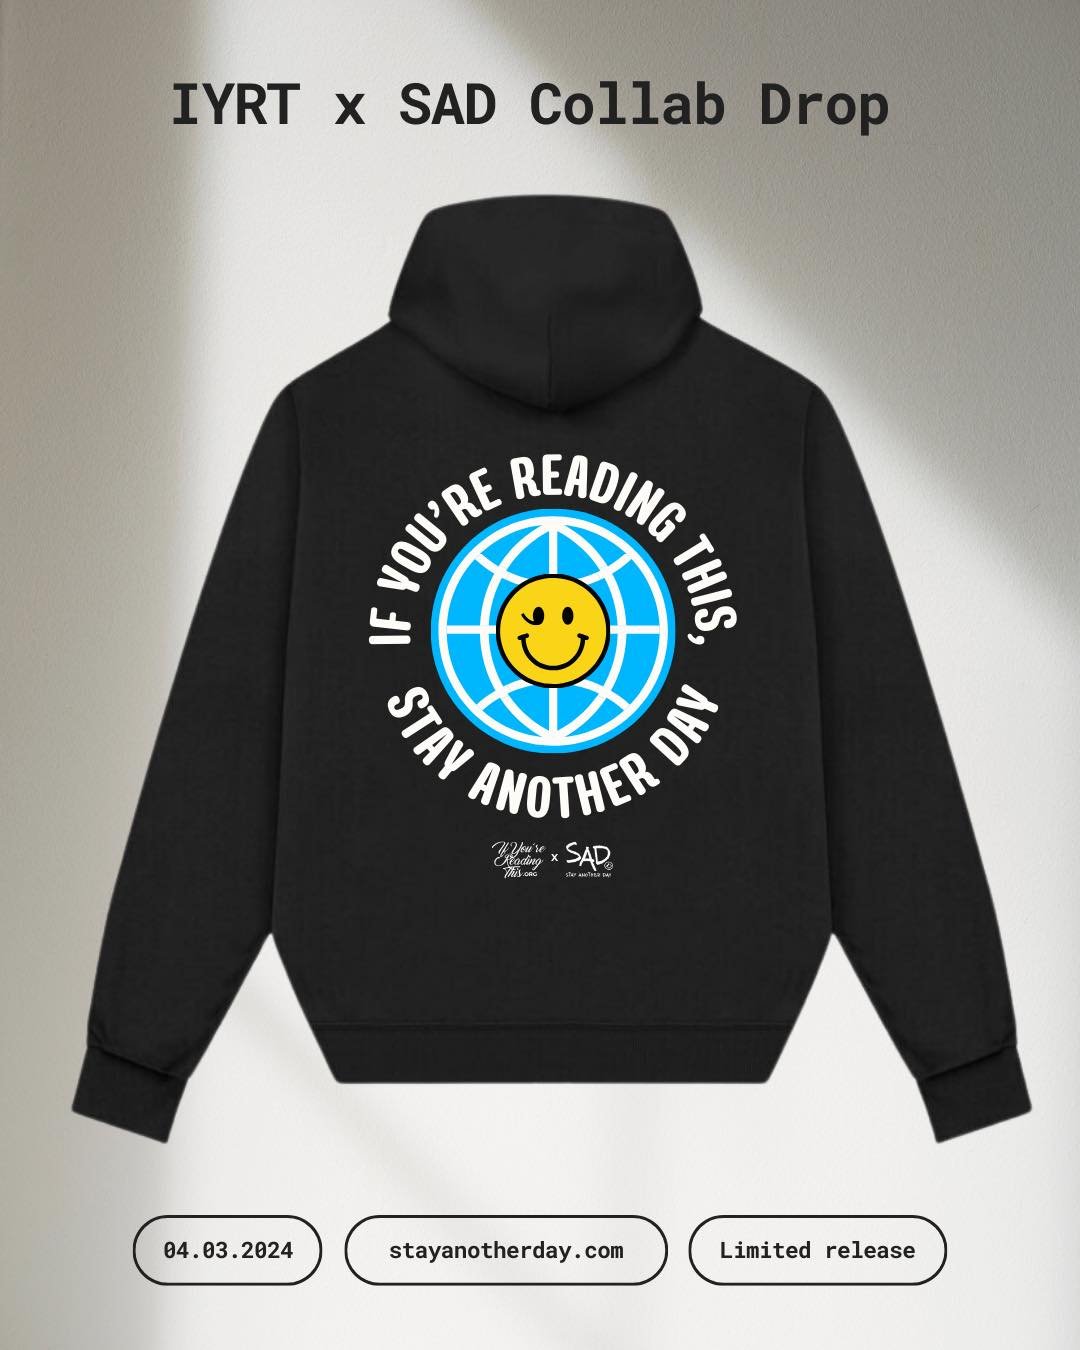 Have you gotten your @stayanotherday_ x IfYoureReadingThis hoodie yet? Available for a limited time only, 10% of proceeds from these sales will be donated to our organization. Snag yours at the link in our bio 🧠💙